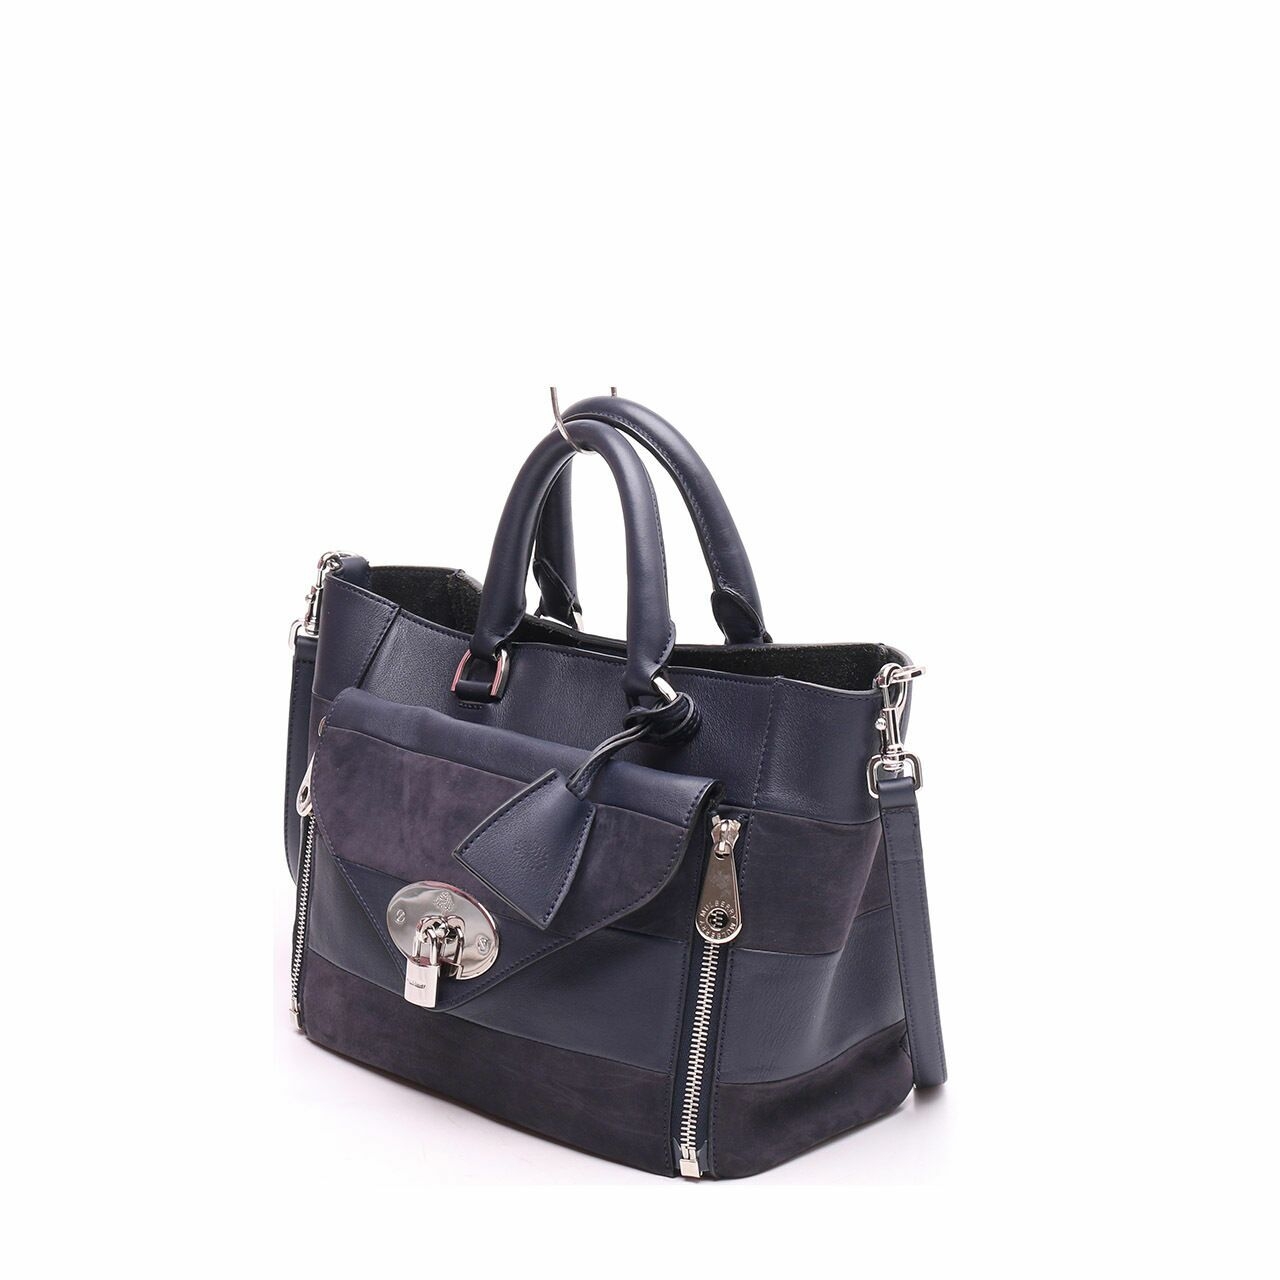 Mulberry Navy Willow Tote Nubuck Leather Satchel